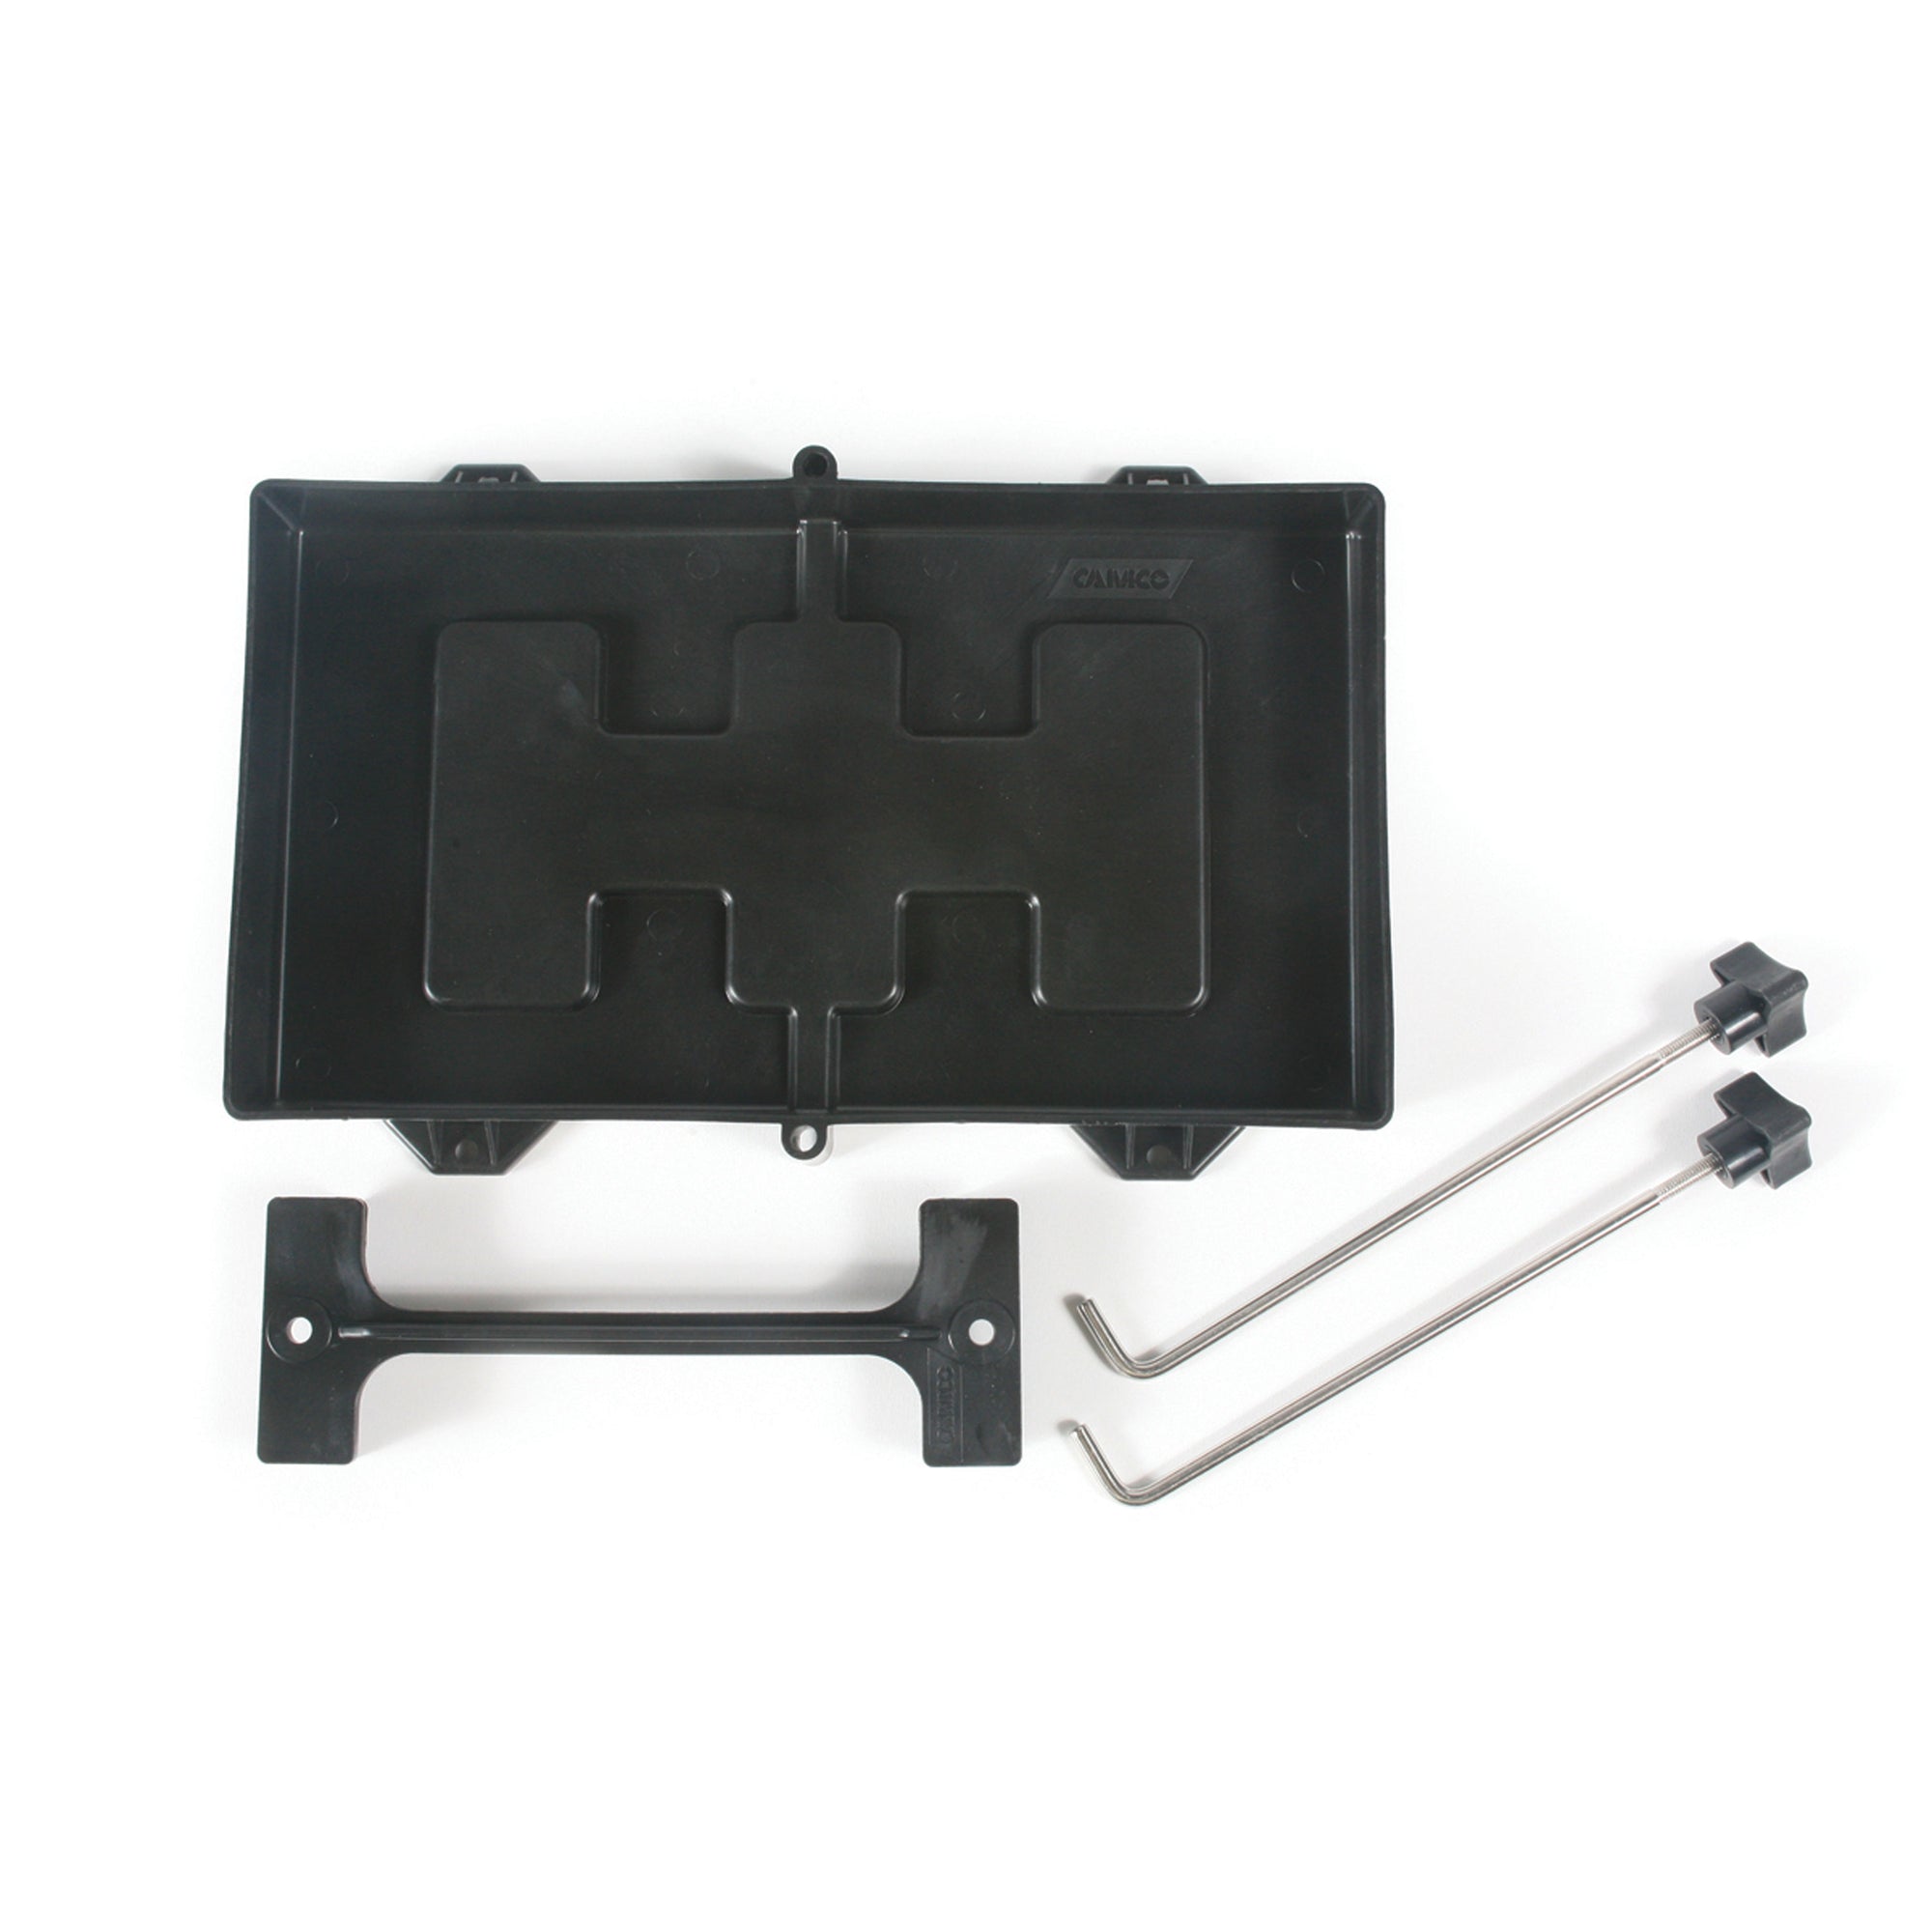 Camco 55404 Battery Tray - Large